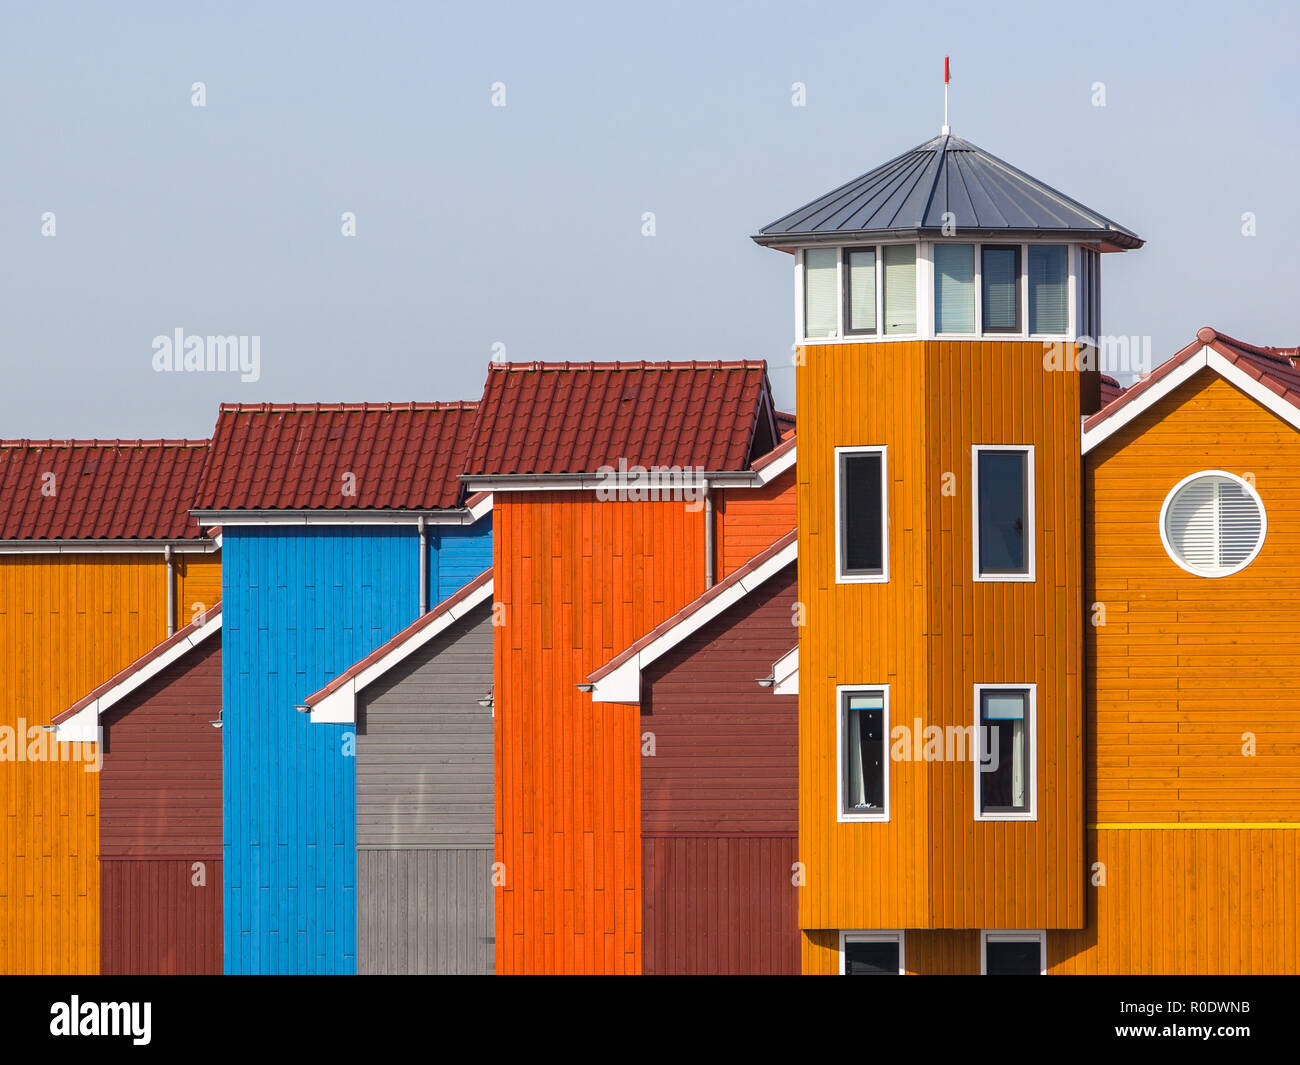 Wooden Houses in various Colors in Groningen, Netherlands Stock Photo